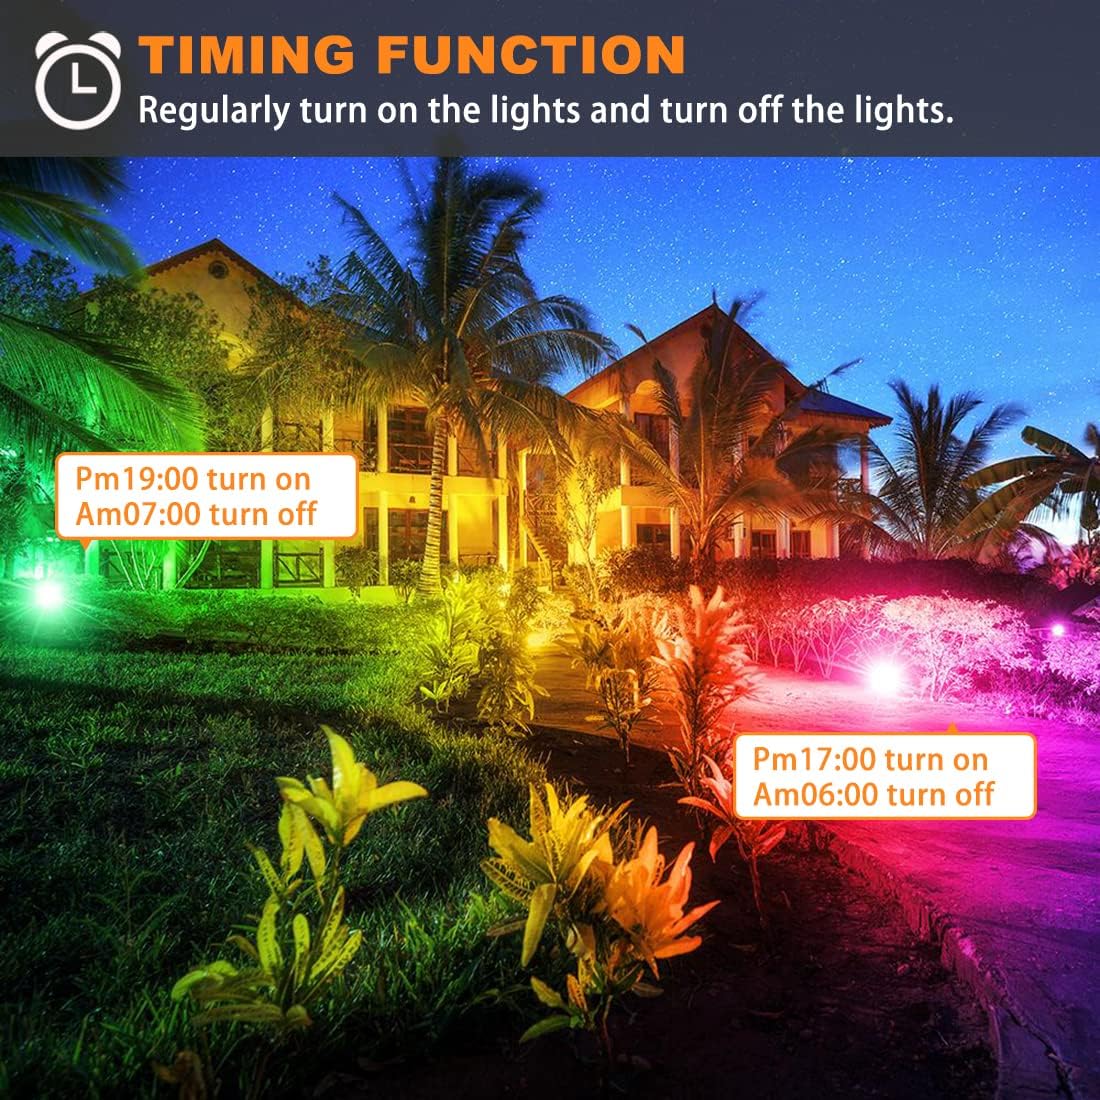 MELPO 30W Led Flood Light Outdoor 300W Equivalent, Color Changing RGB Lights with Remote, 120 RGB Colors, Warm White 2700K, Timing, C